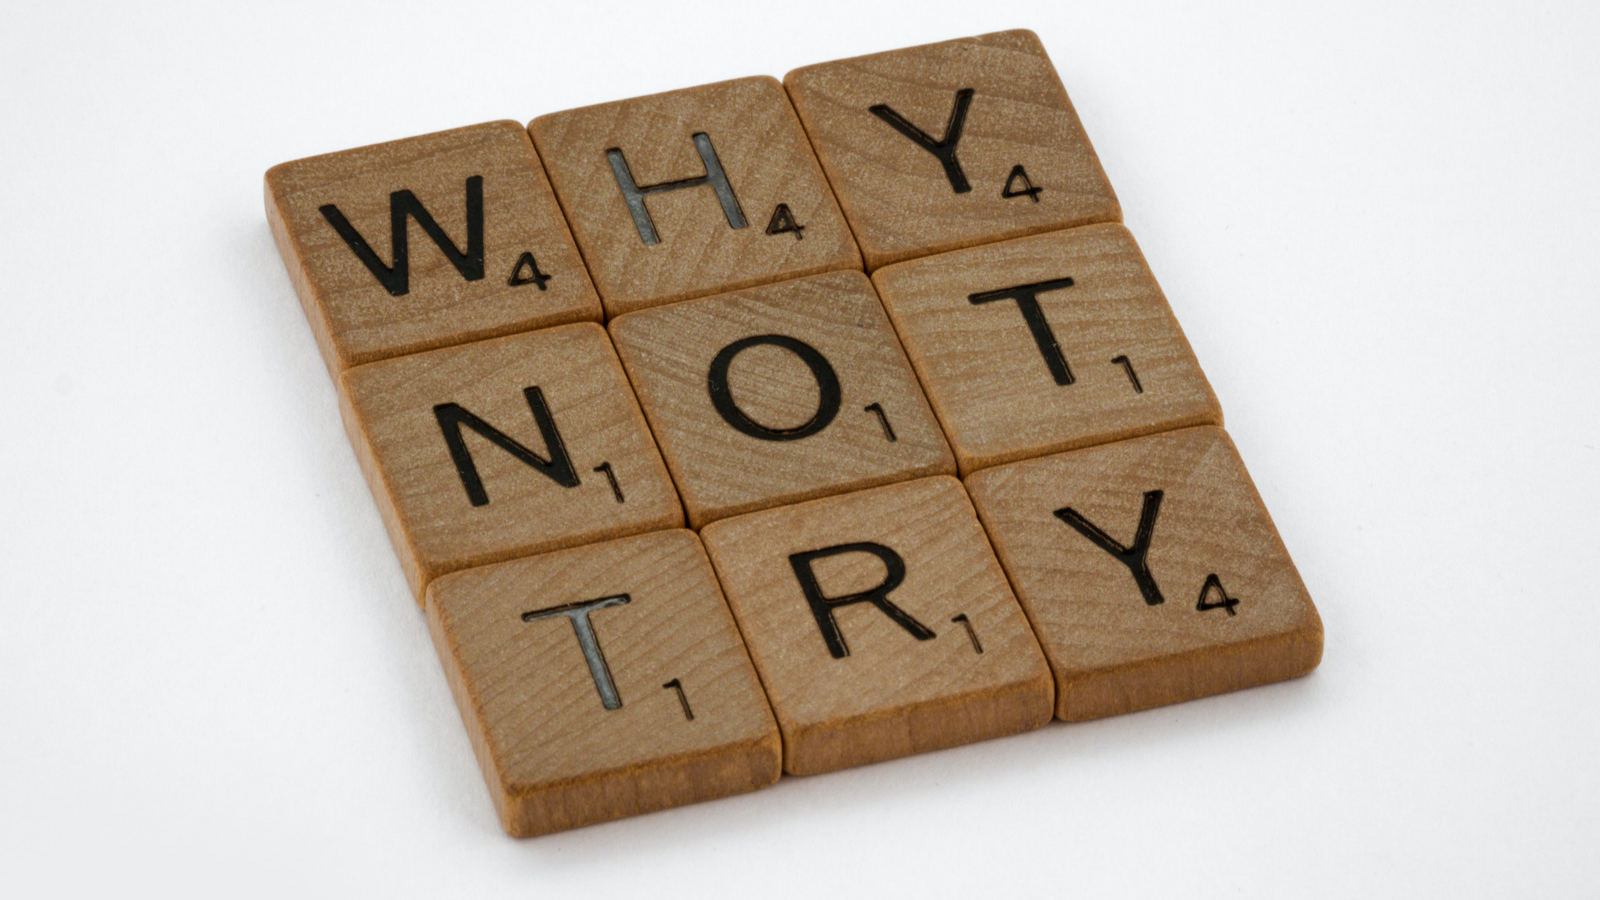 Scrabble tiles spelling out "Why not try"